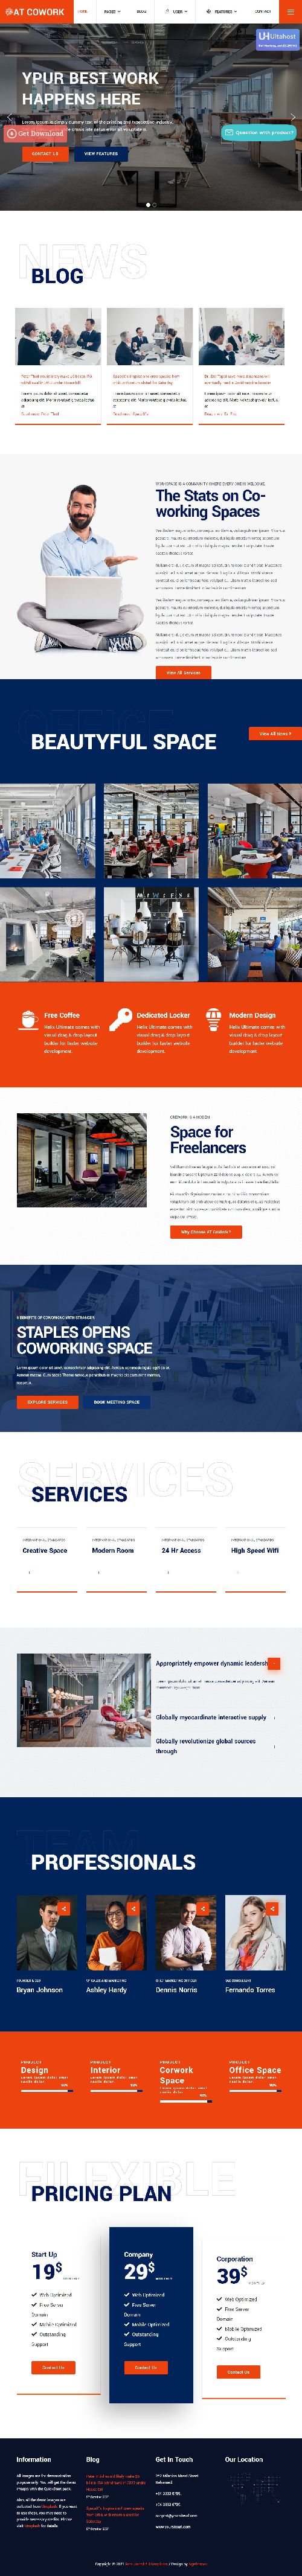 Cowork - Joomla Template for Working Space Providers